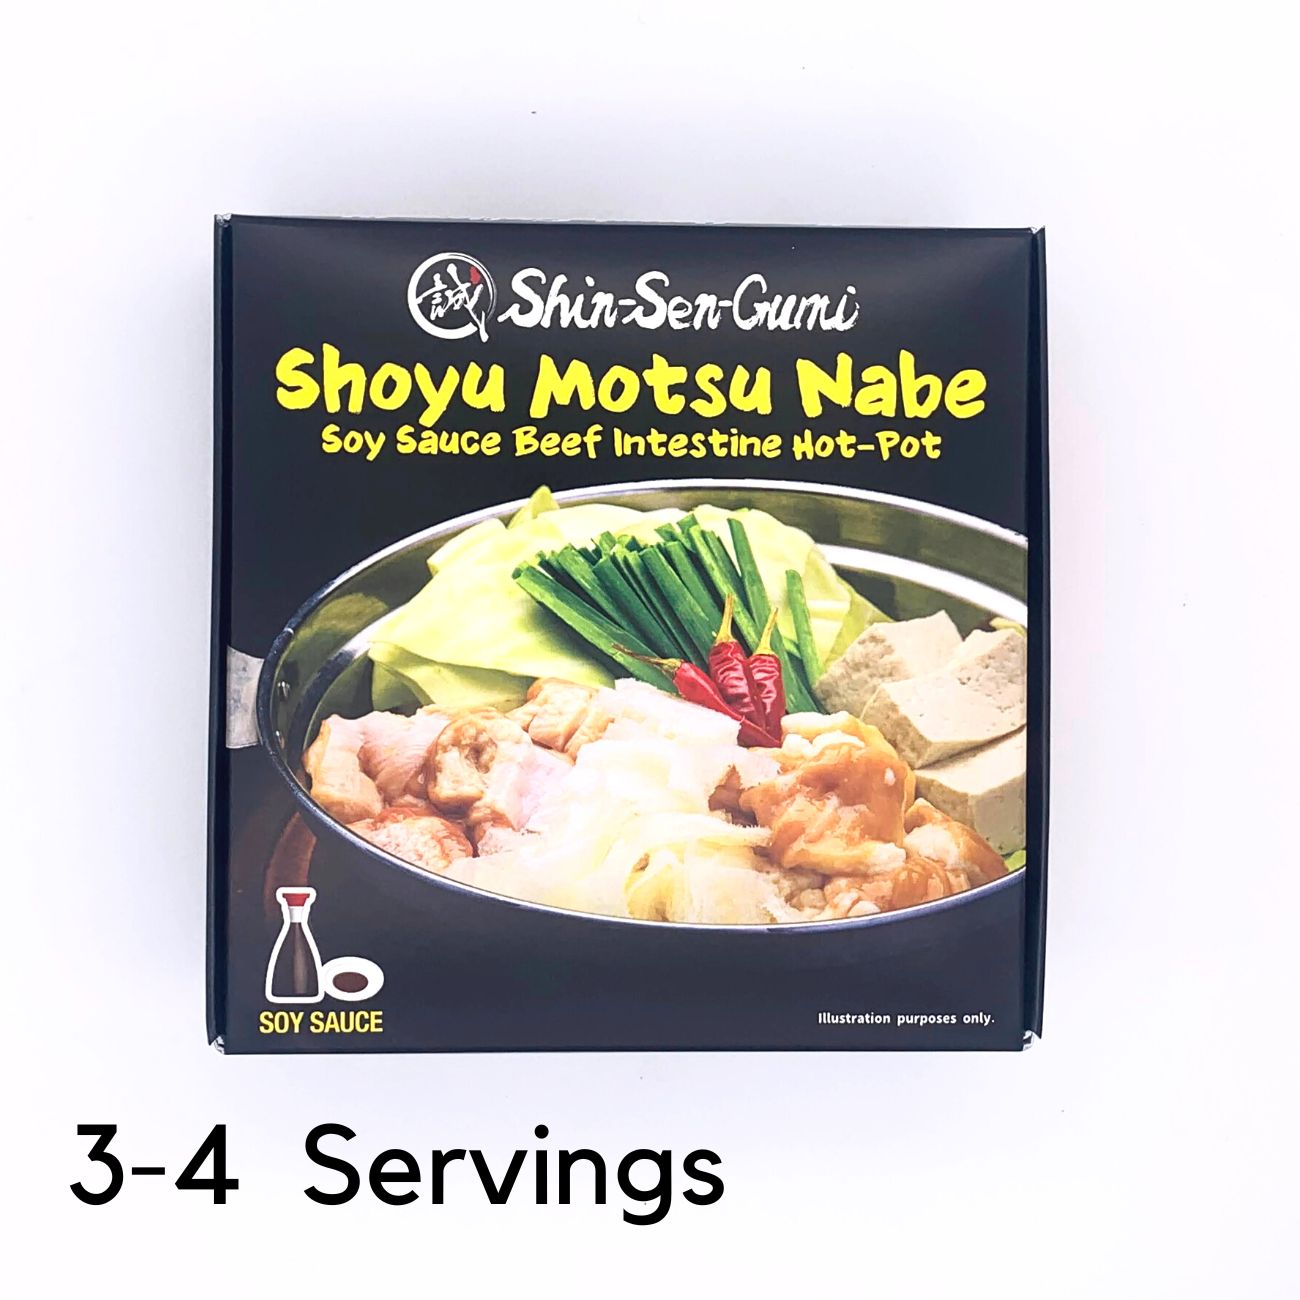 shoyu motsu nabe package with 3-4 servings text on bottom left